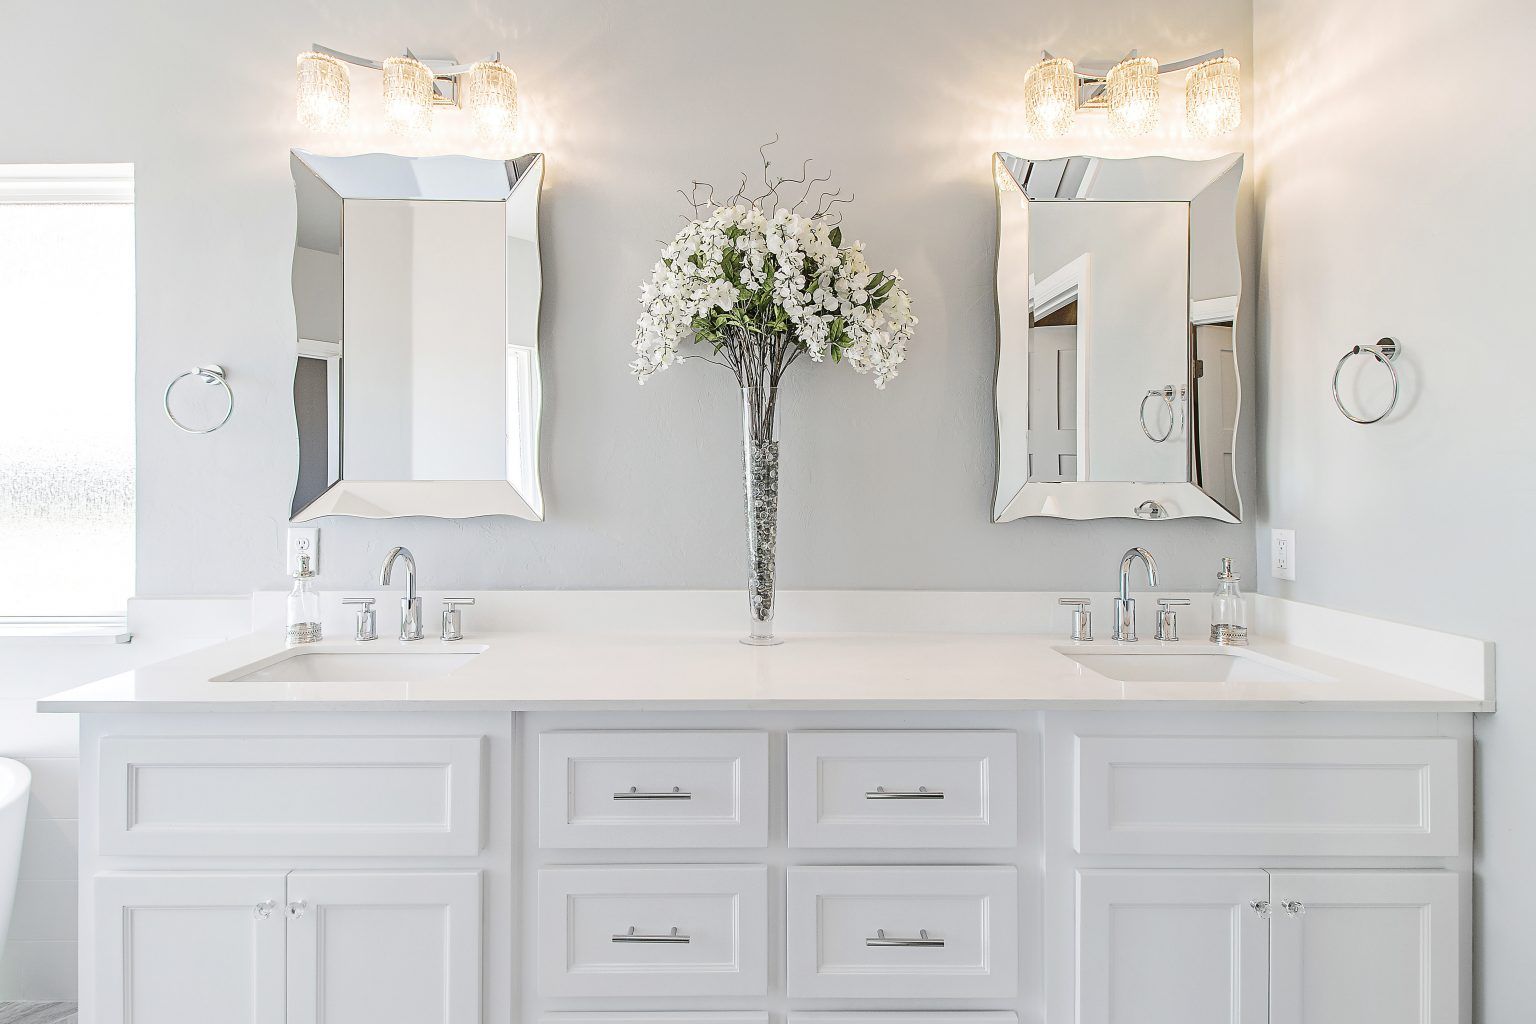 10 Common Bathroom Renovation Mistakes You Should Avoid